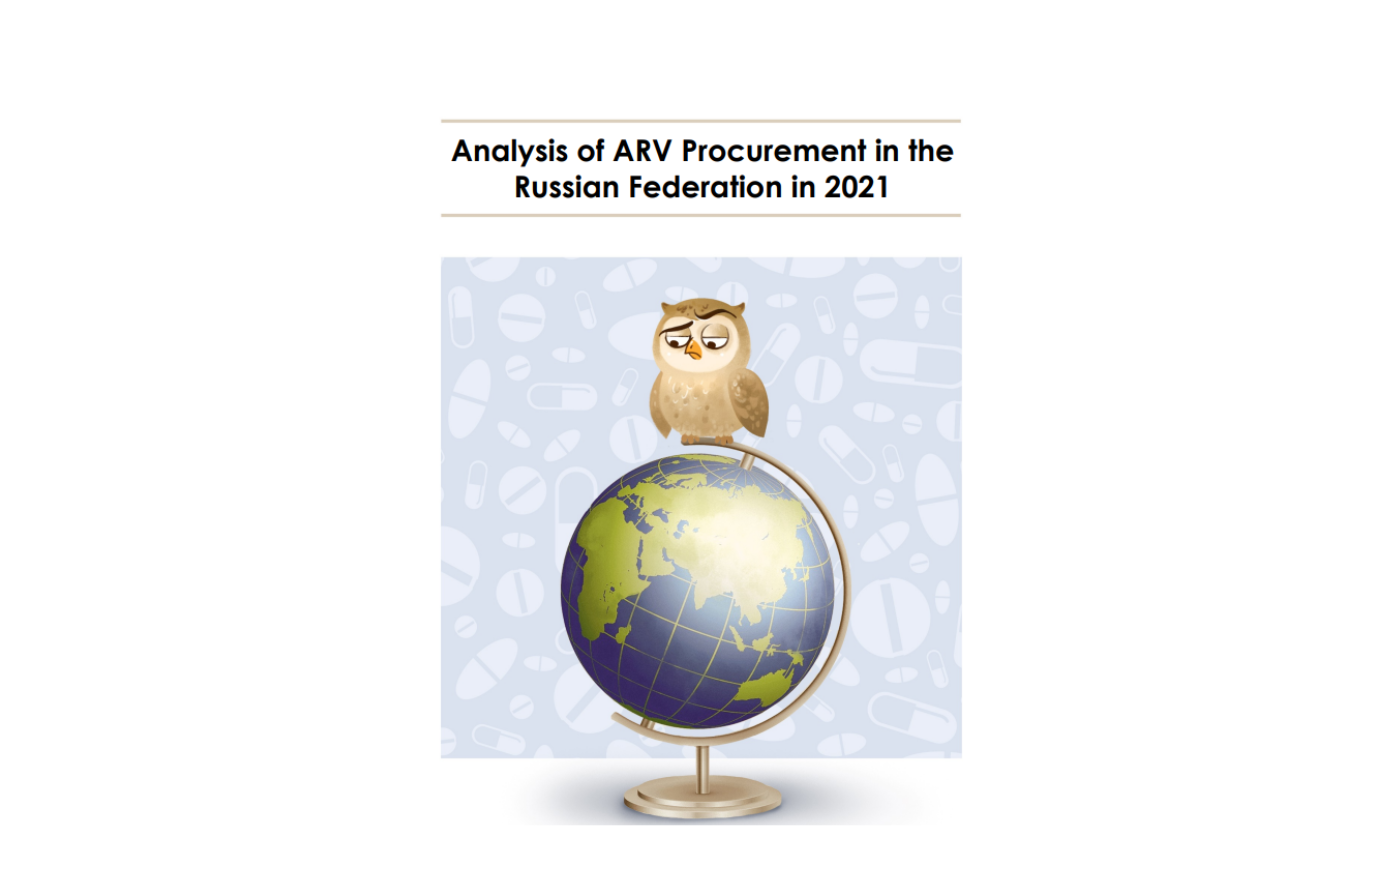 Analysis of ARV Procurement in the Russian Federation in 2021